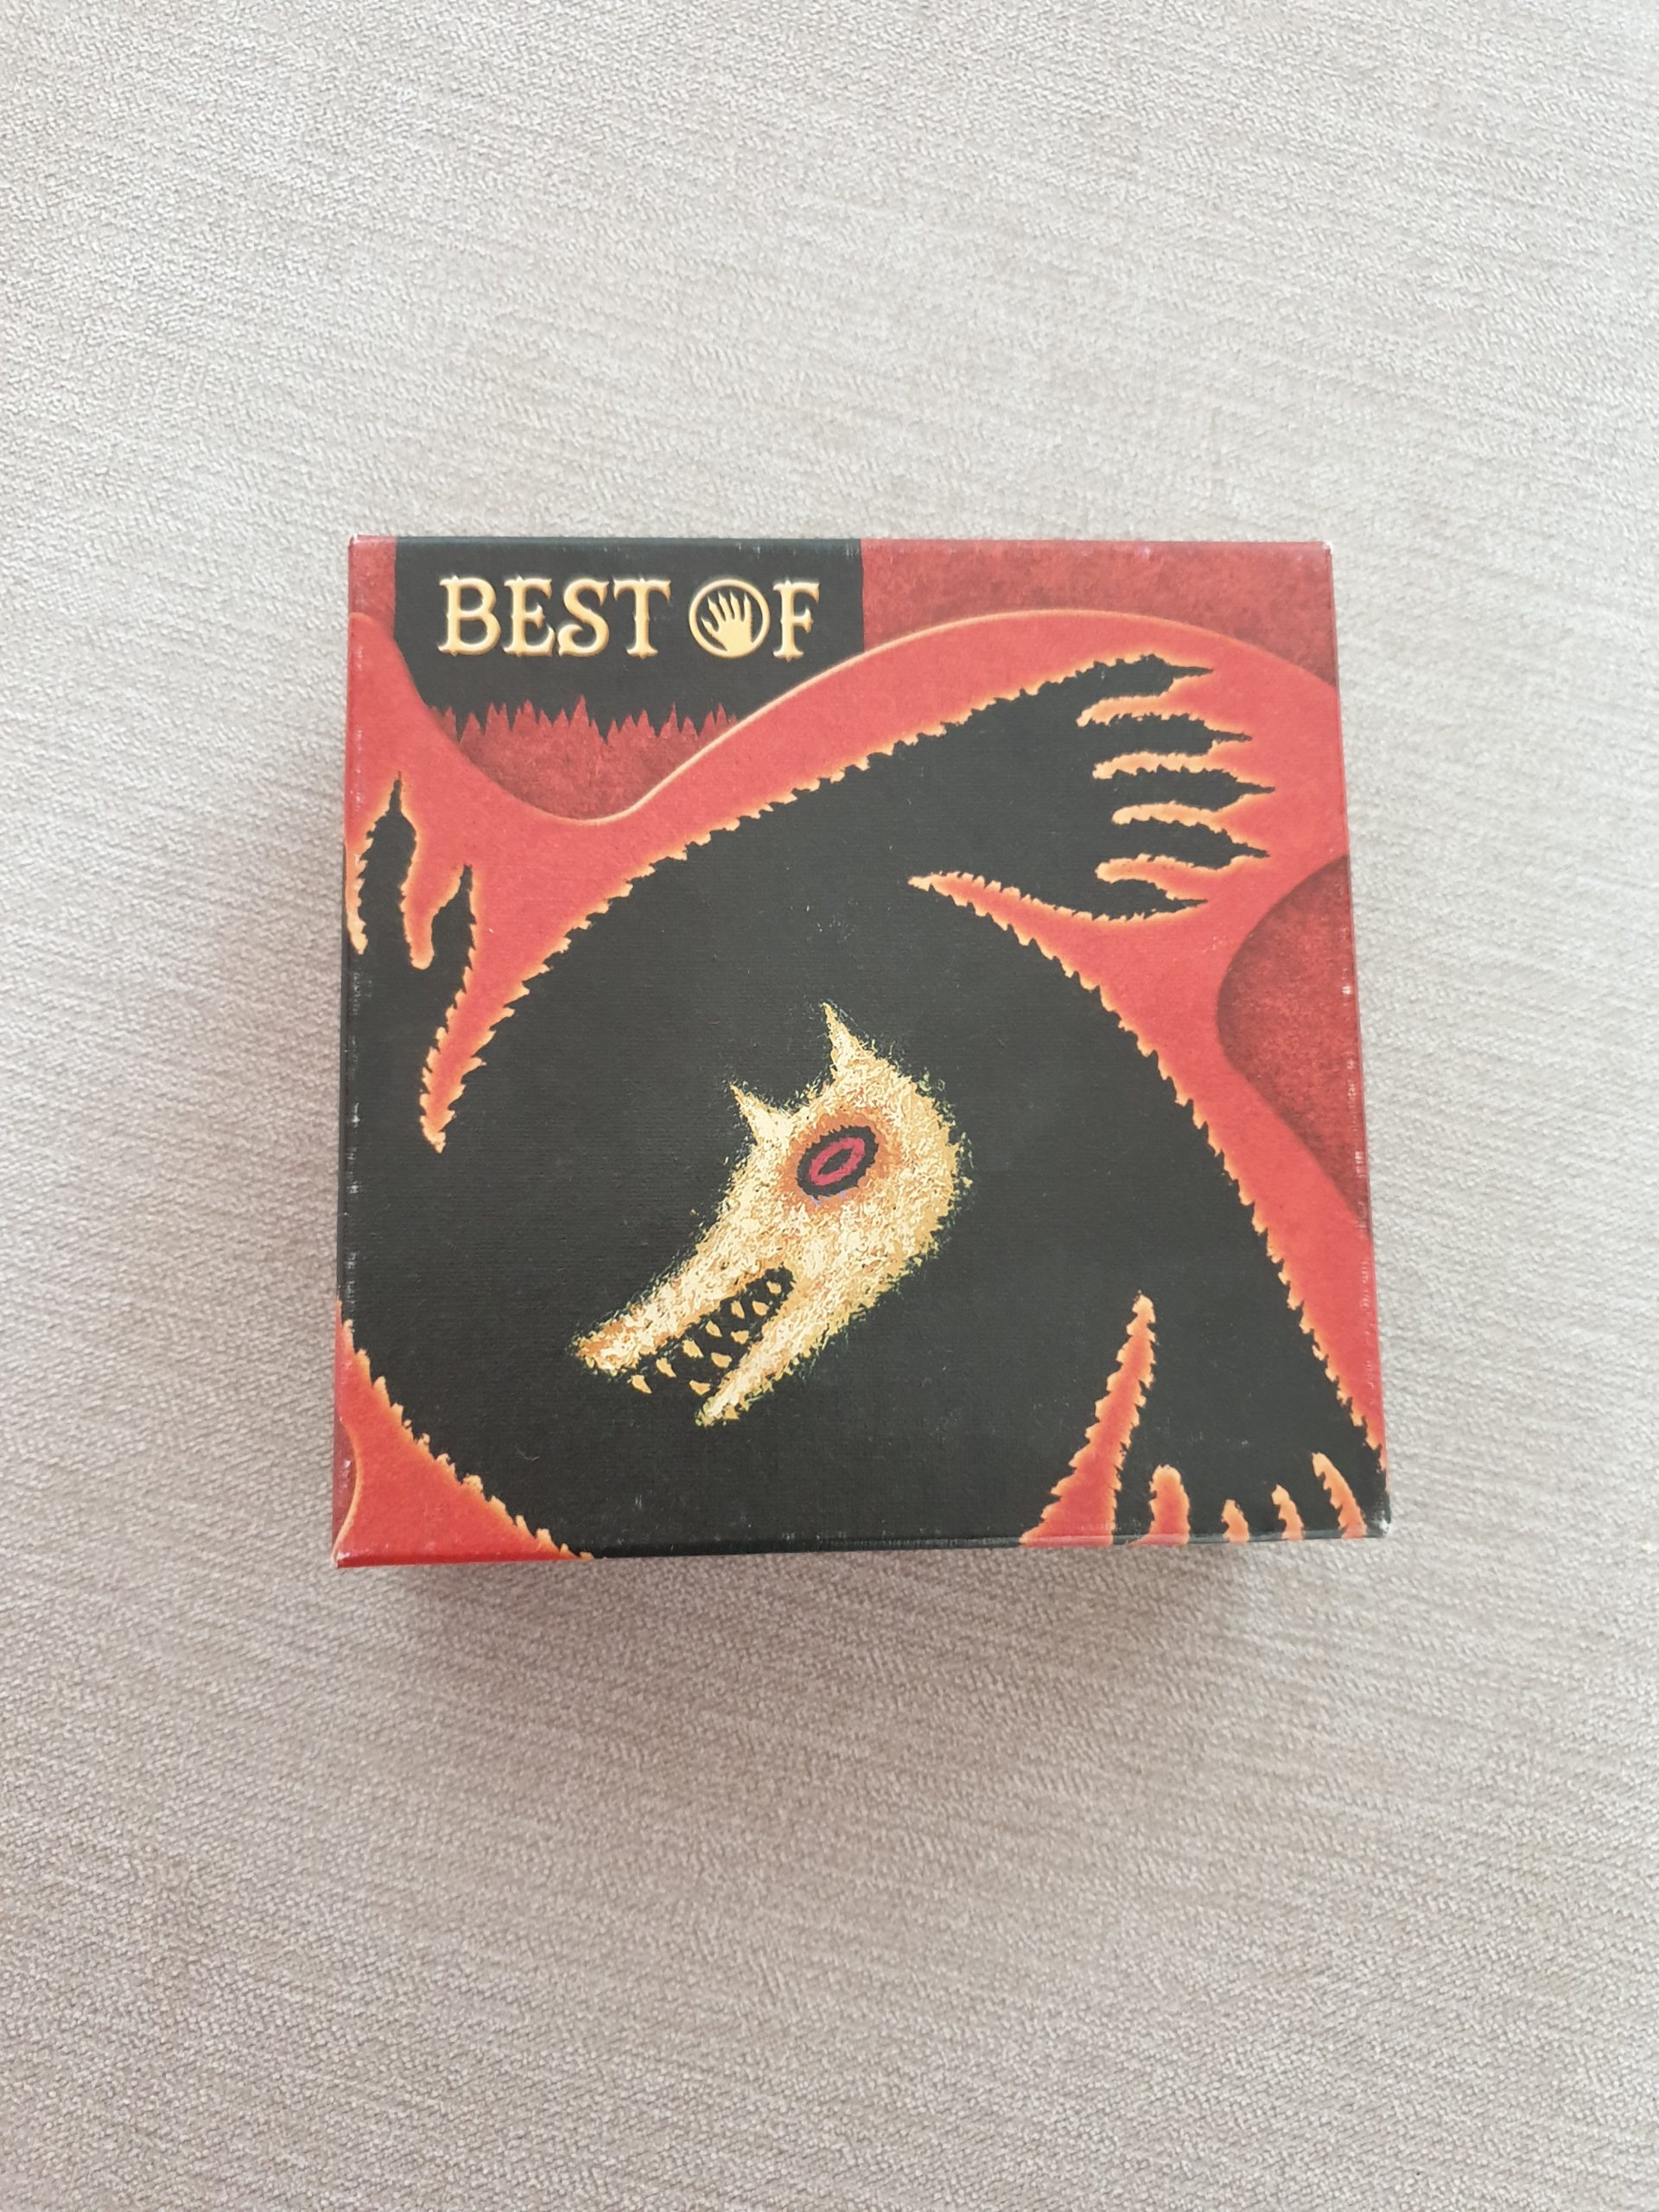 The outer box of the game features a wolf's head inside a spiralling black pattern of wolf's paws, which is in turn inside a spiralling red pattern. The words 'Best of' are printed on the top left of the box.